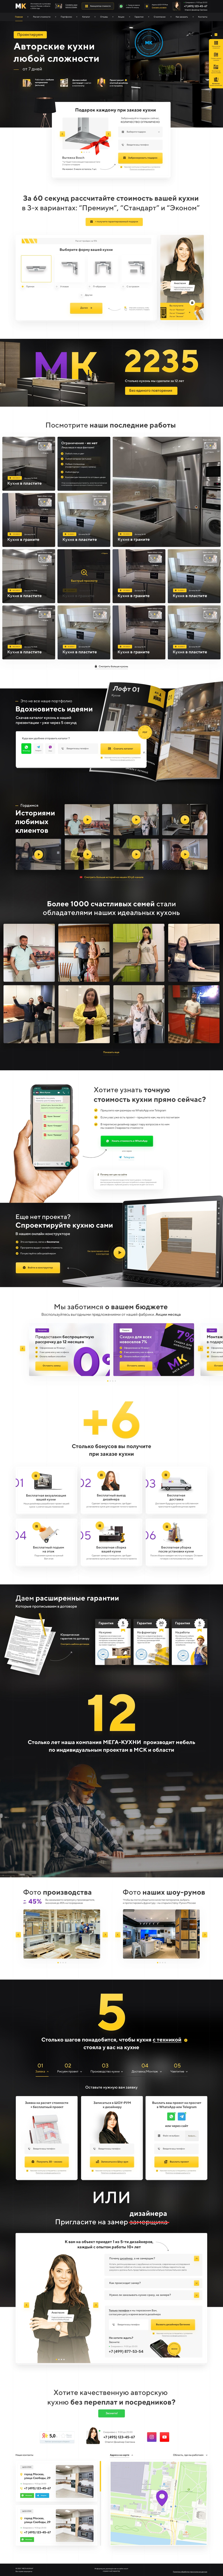 Landing Page Краматорск